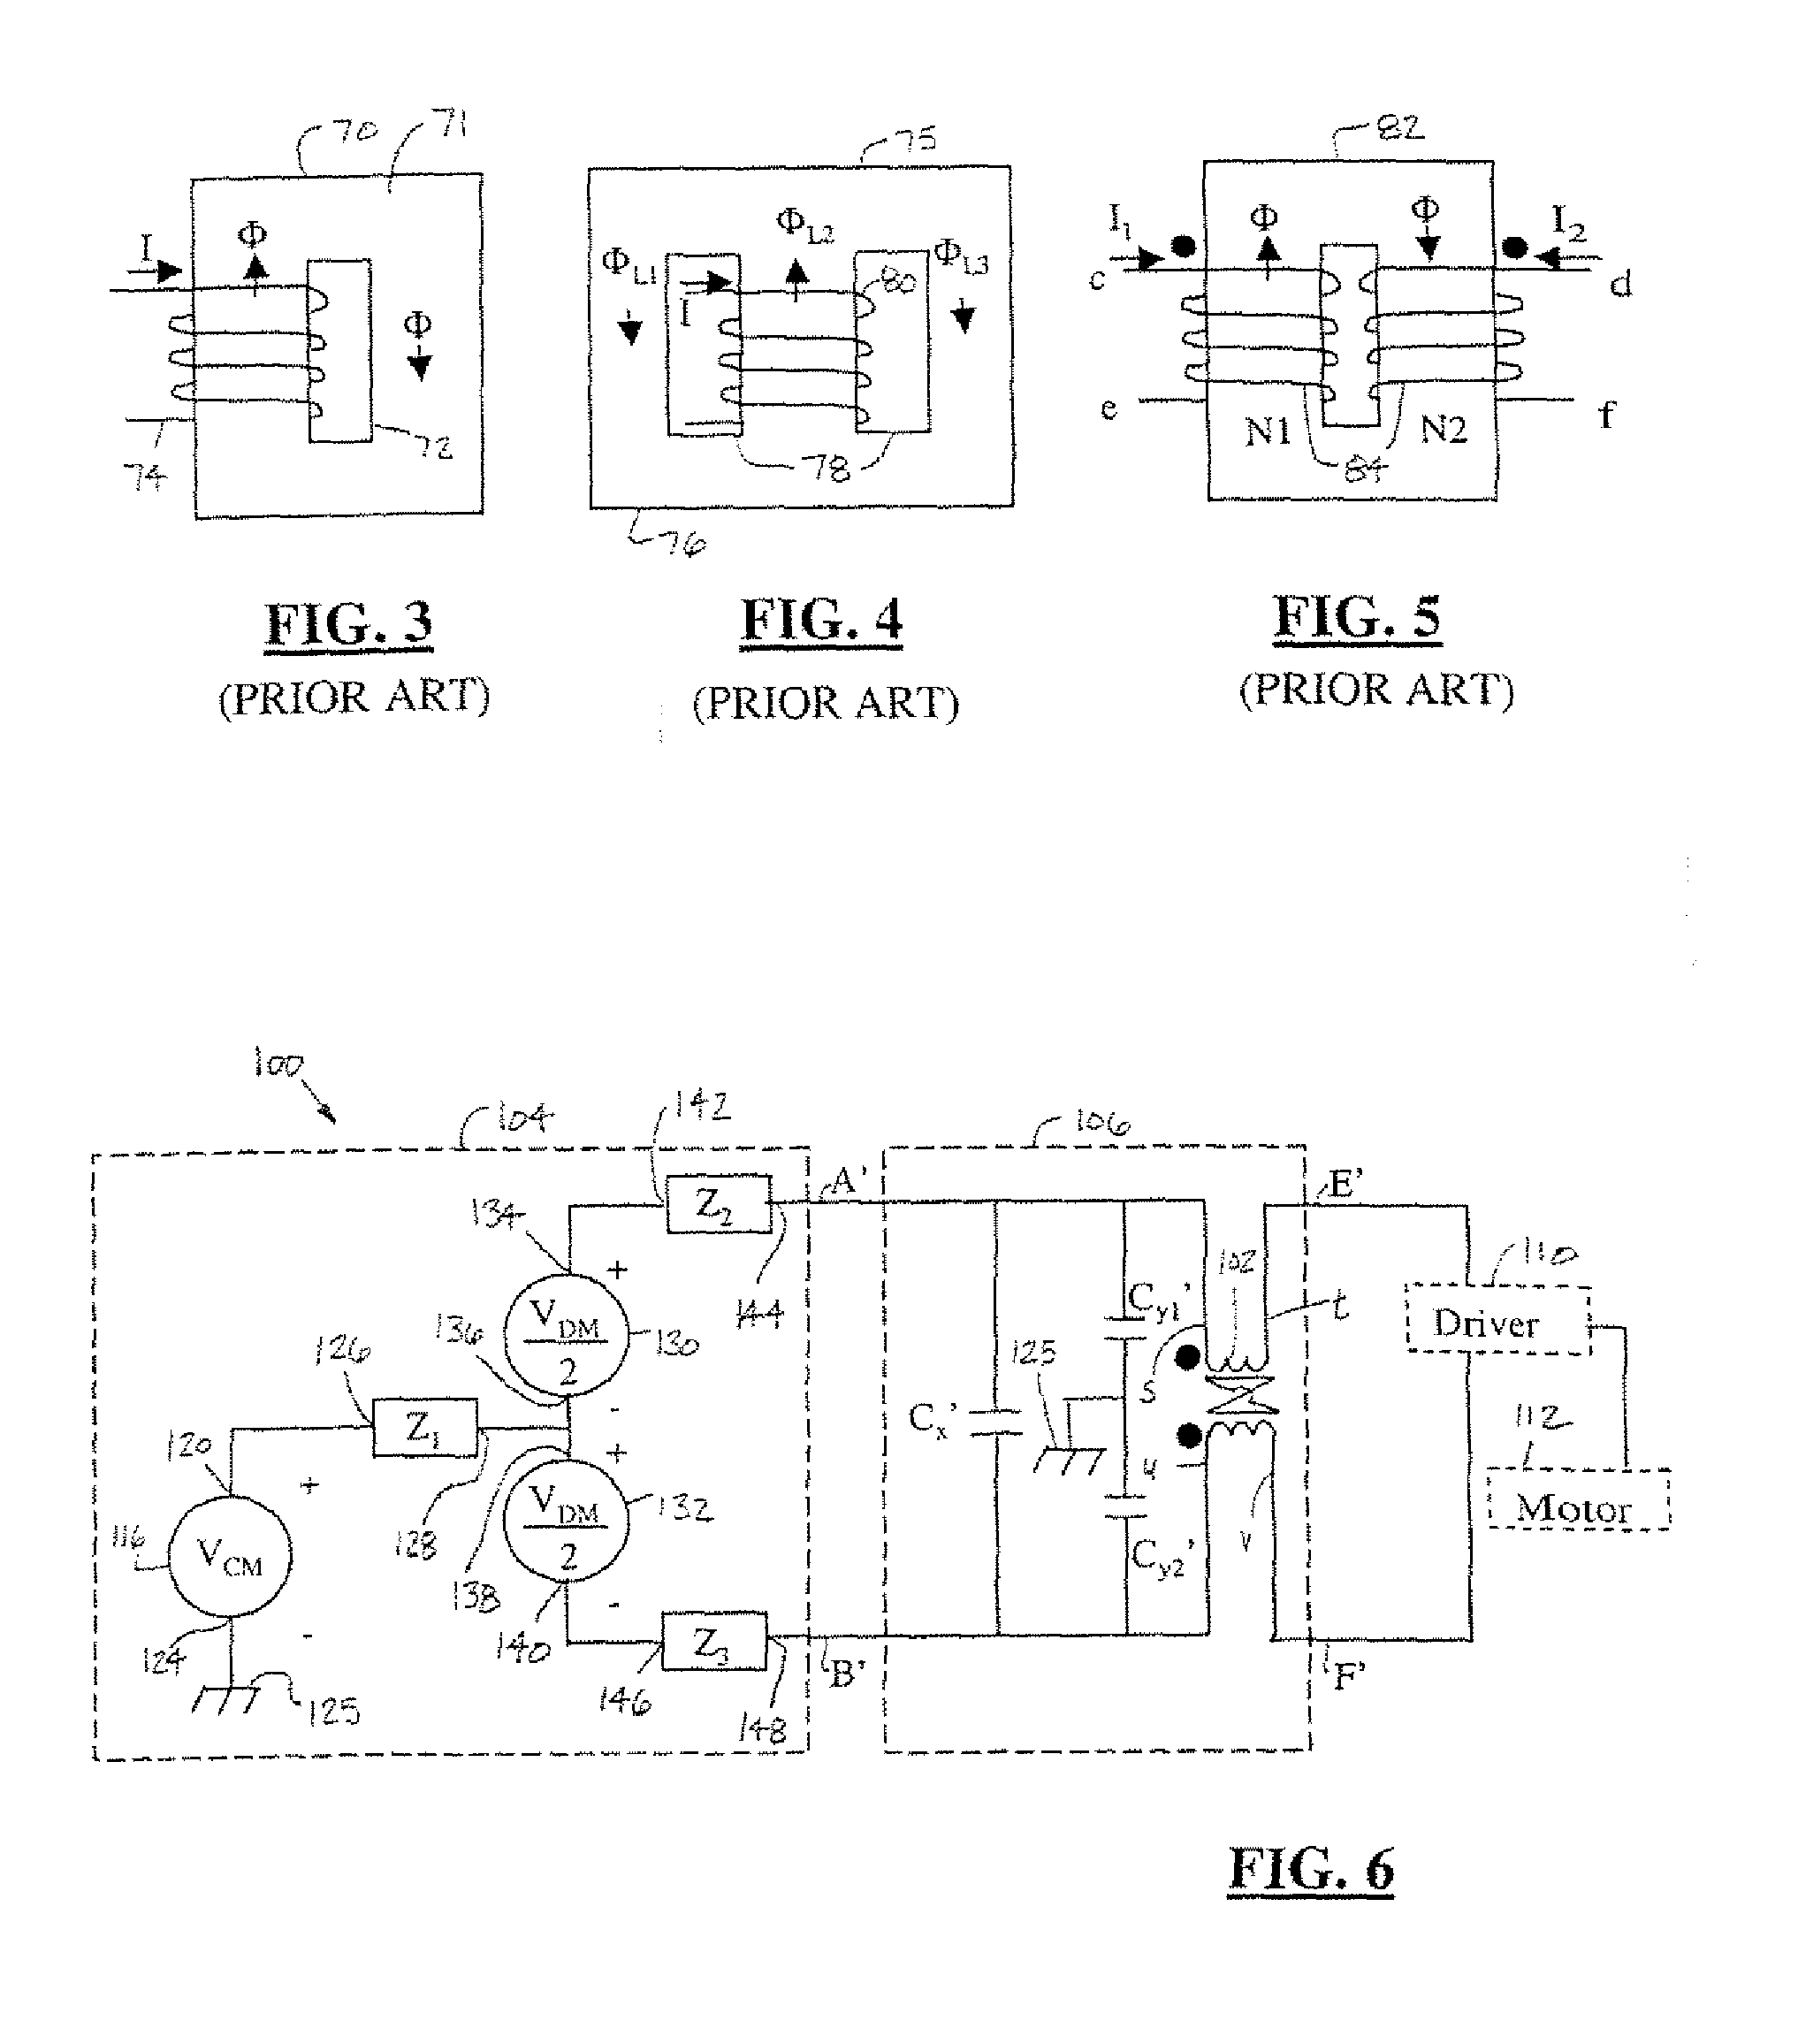 Inductor topologies with substantial common-mode and differential-mode inductance